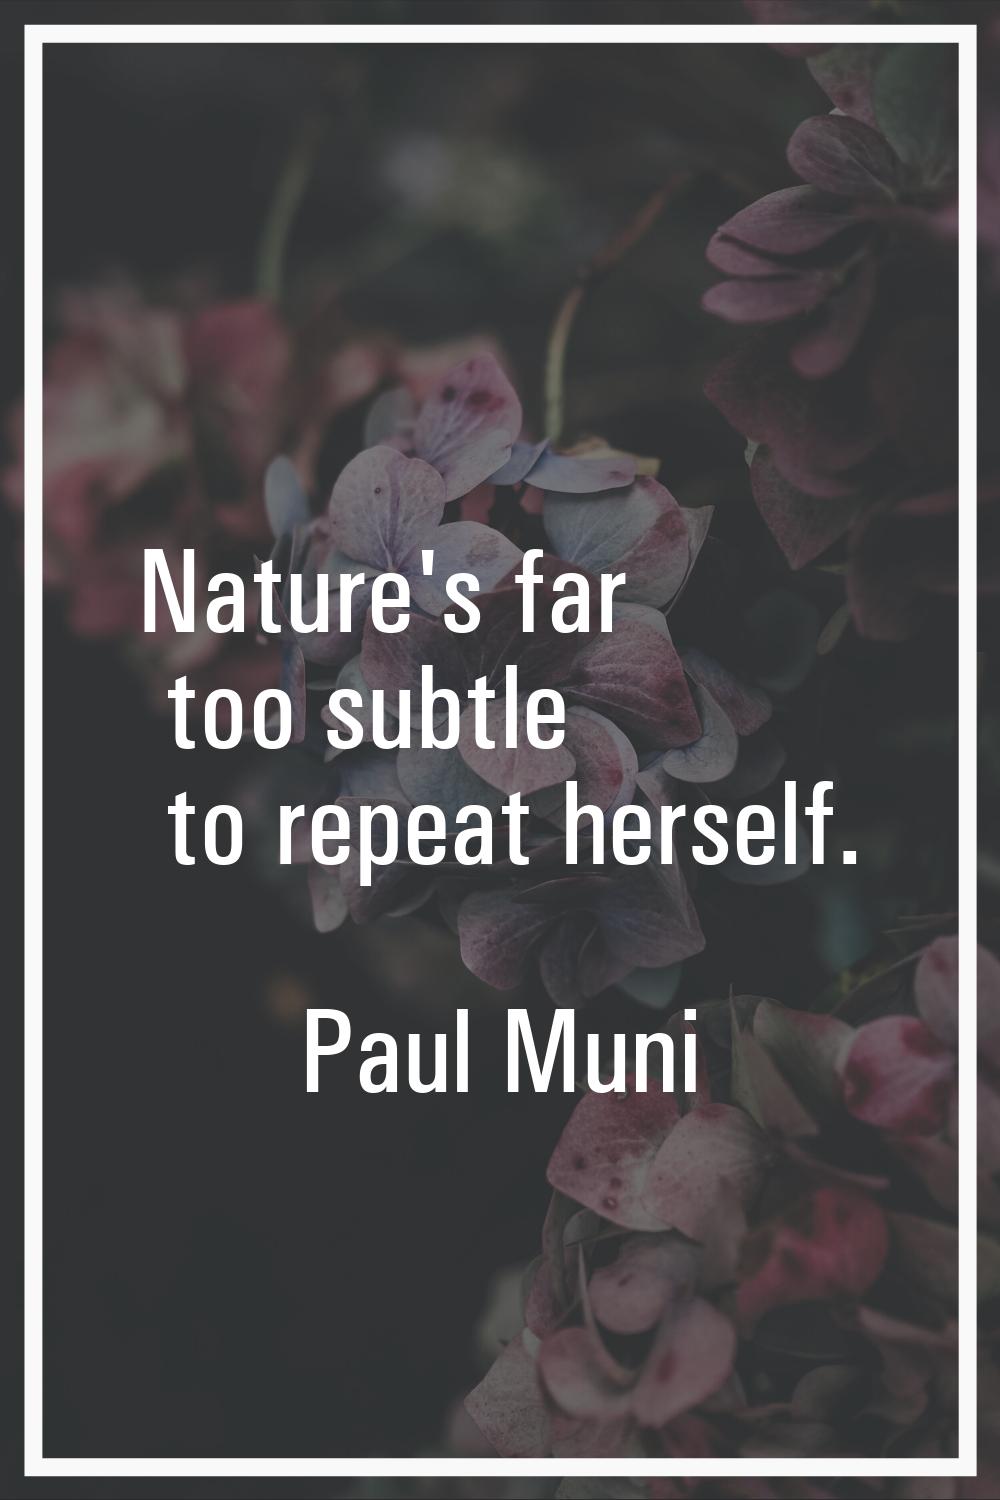 Nature's far too subtle to repeat herself.